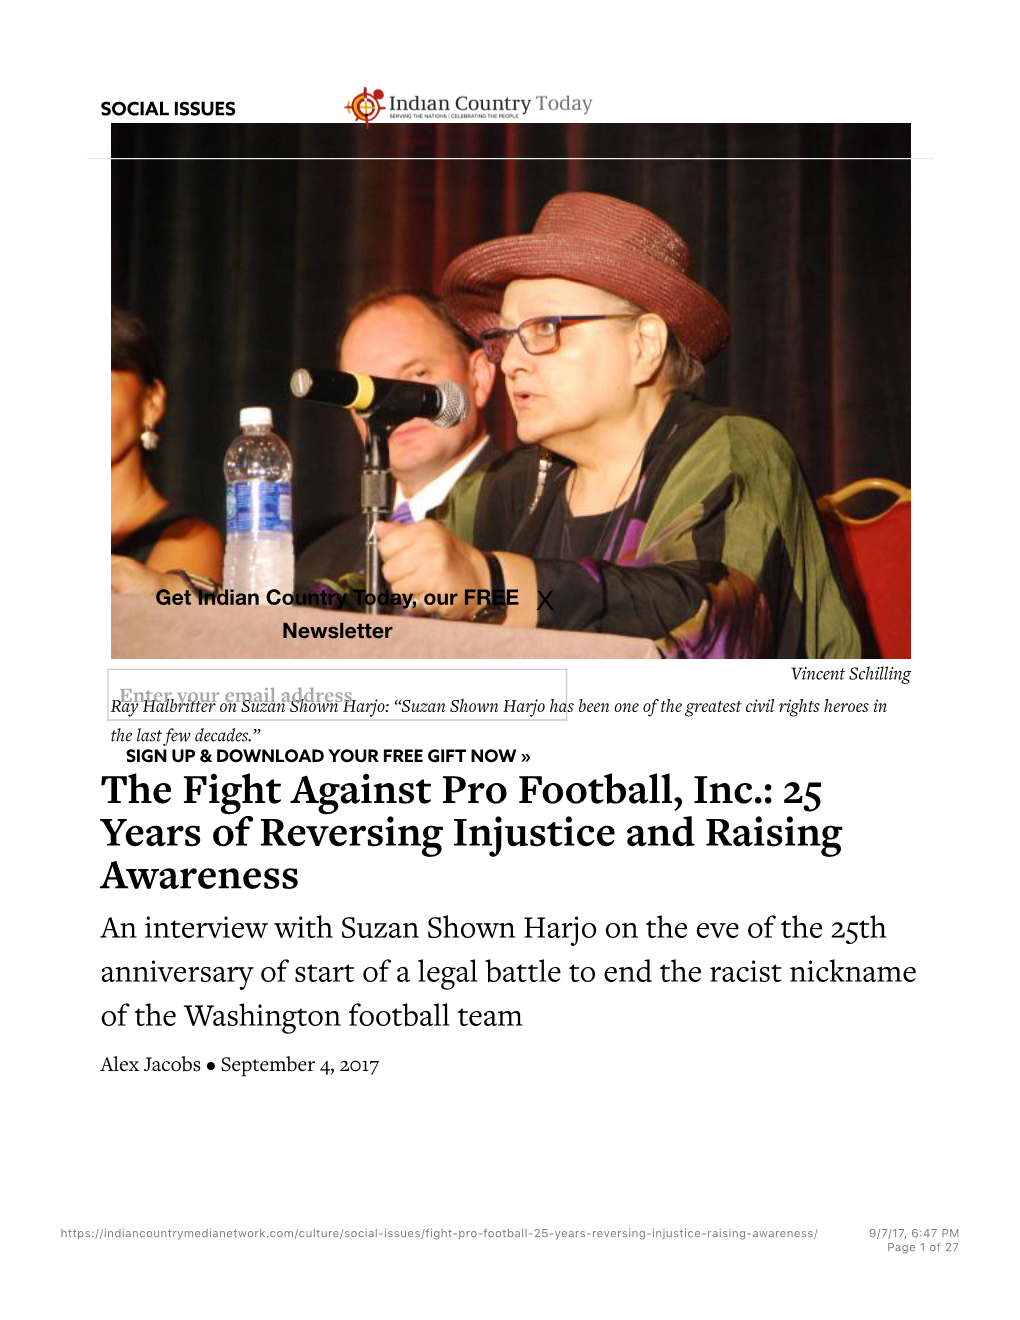 The Fight Against Pro Football, Inc